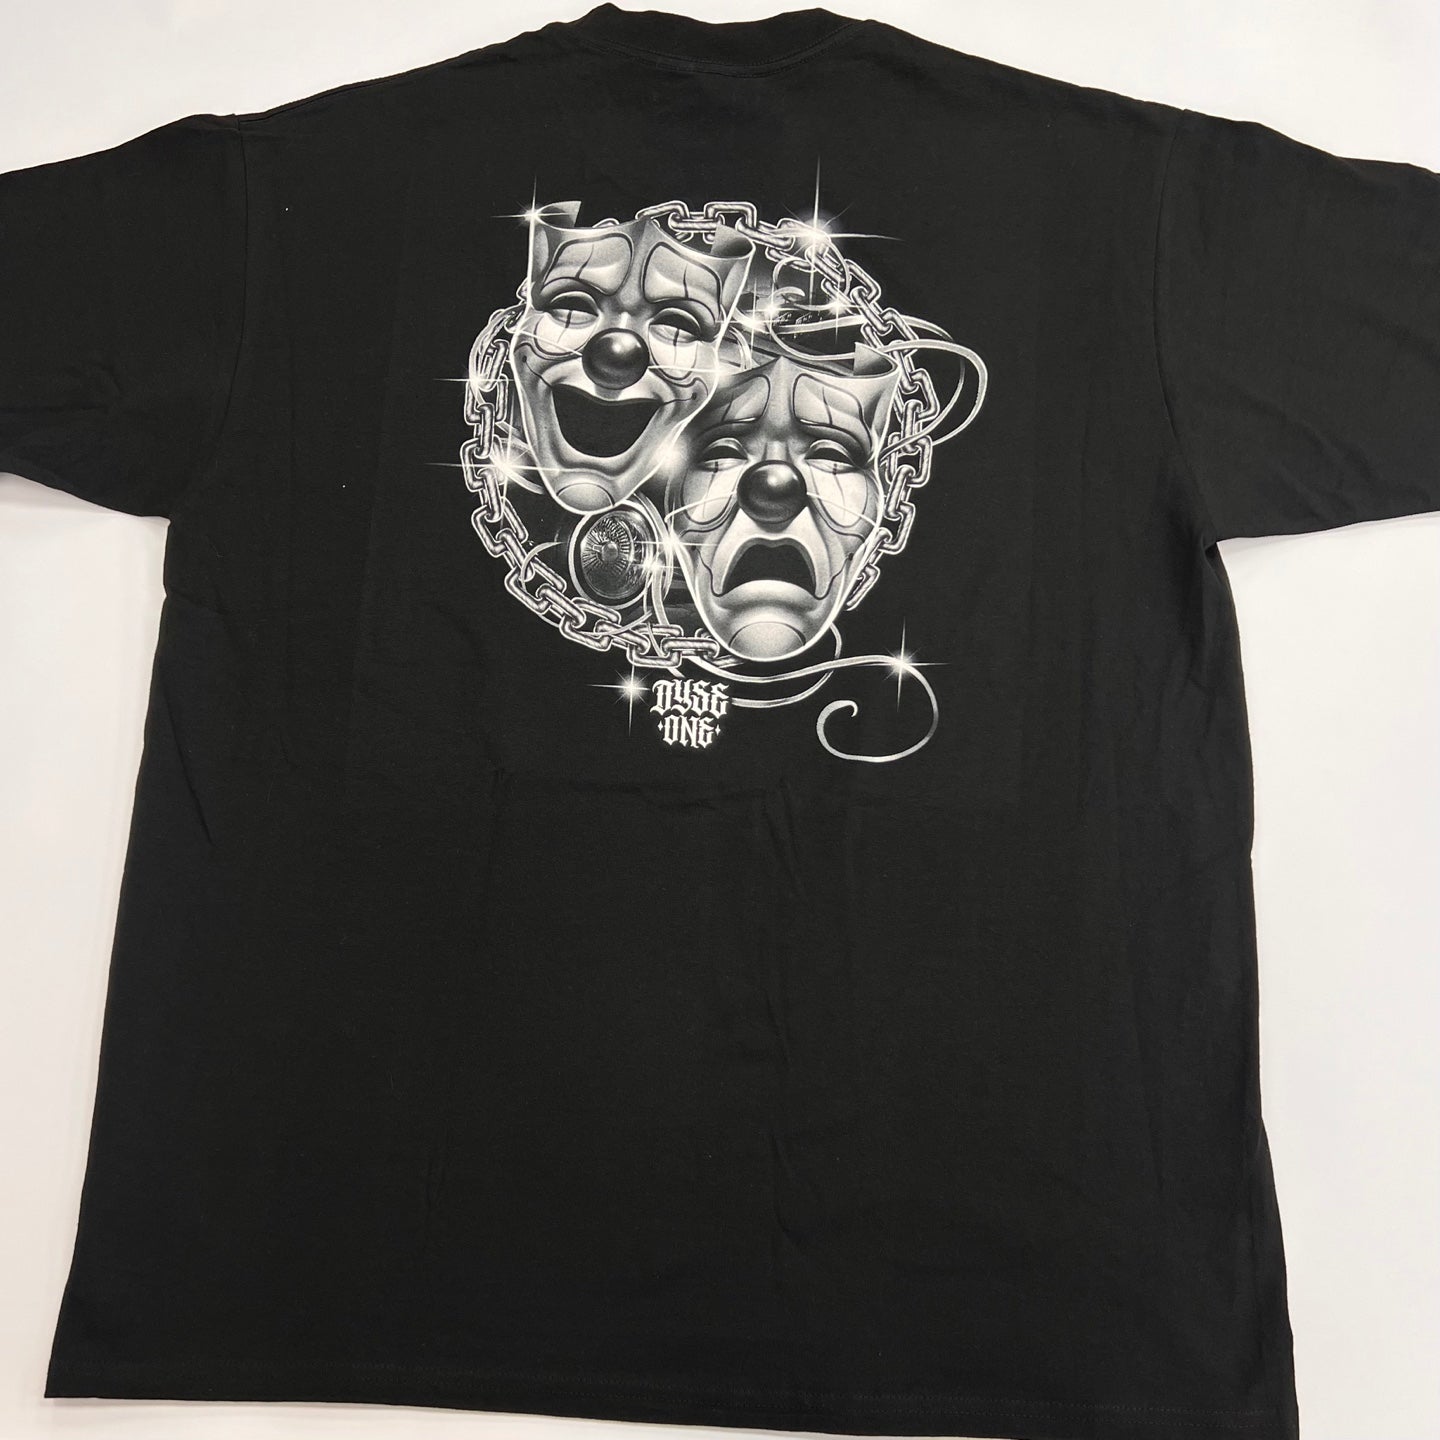 DYSEONE Chain Graphic T-Shirt